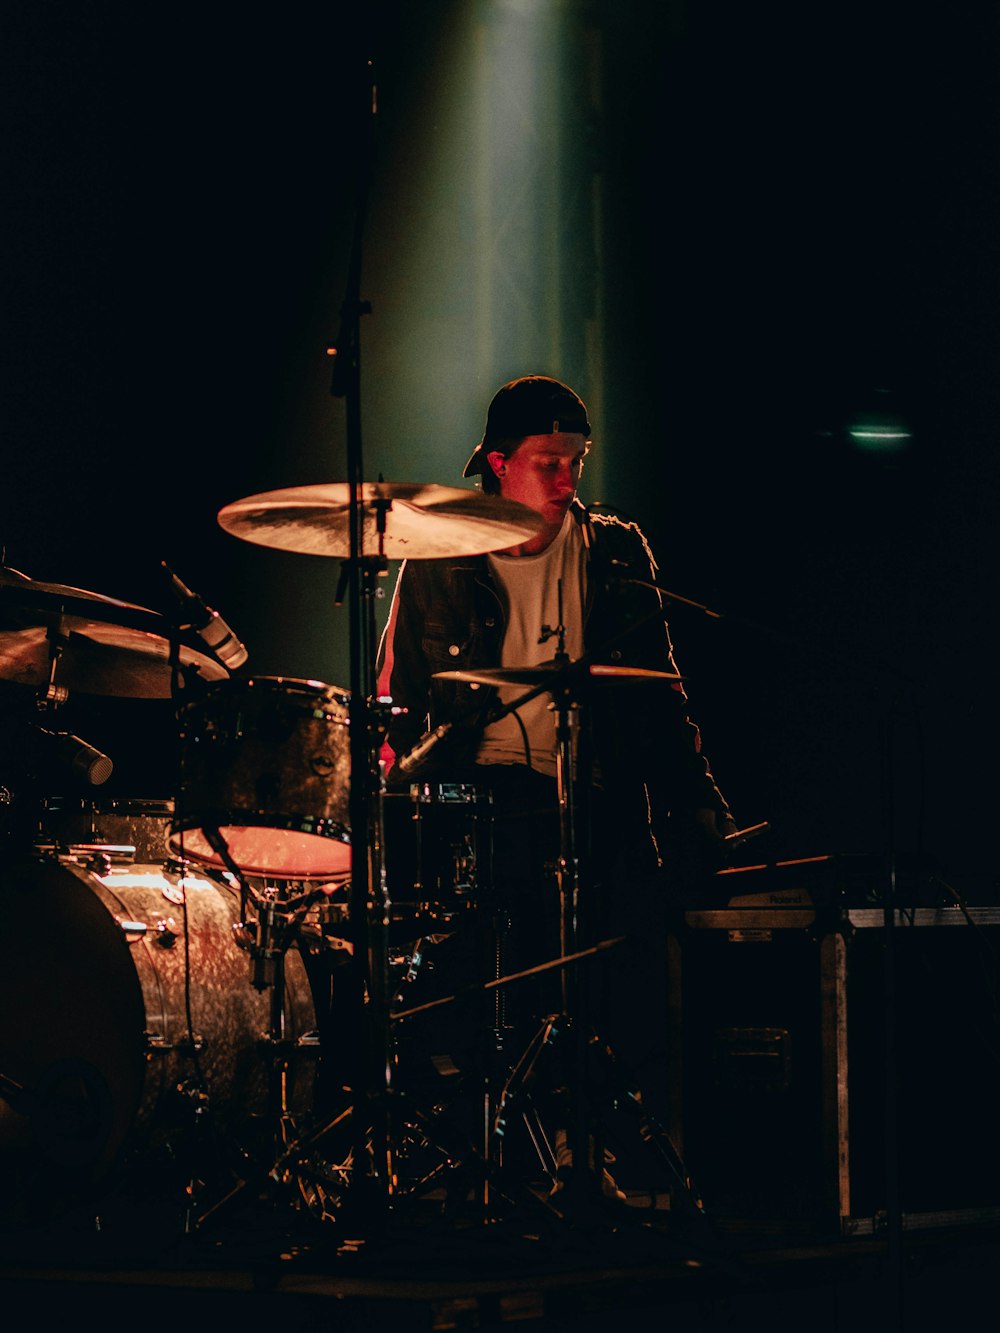 man playing drums on stage